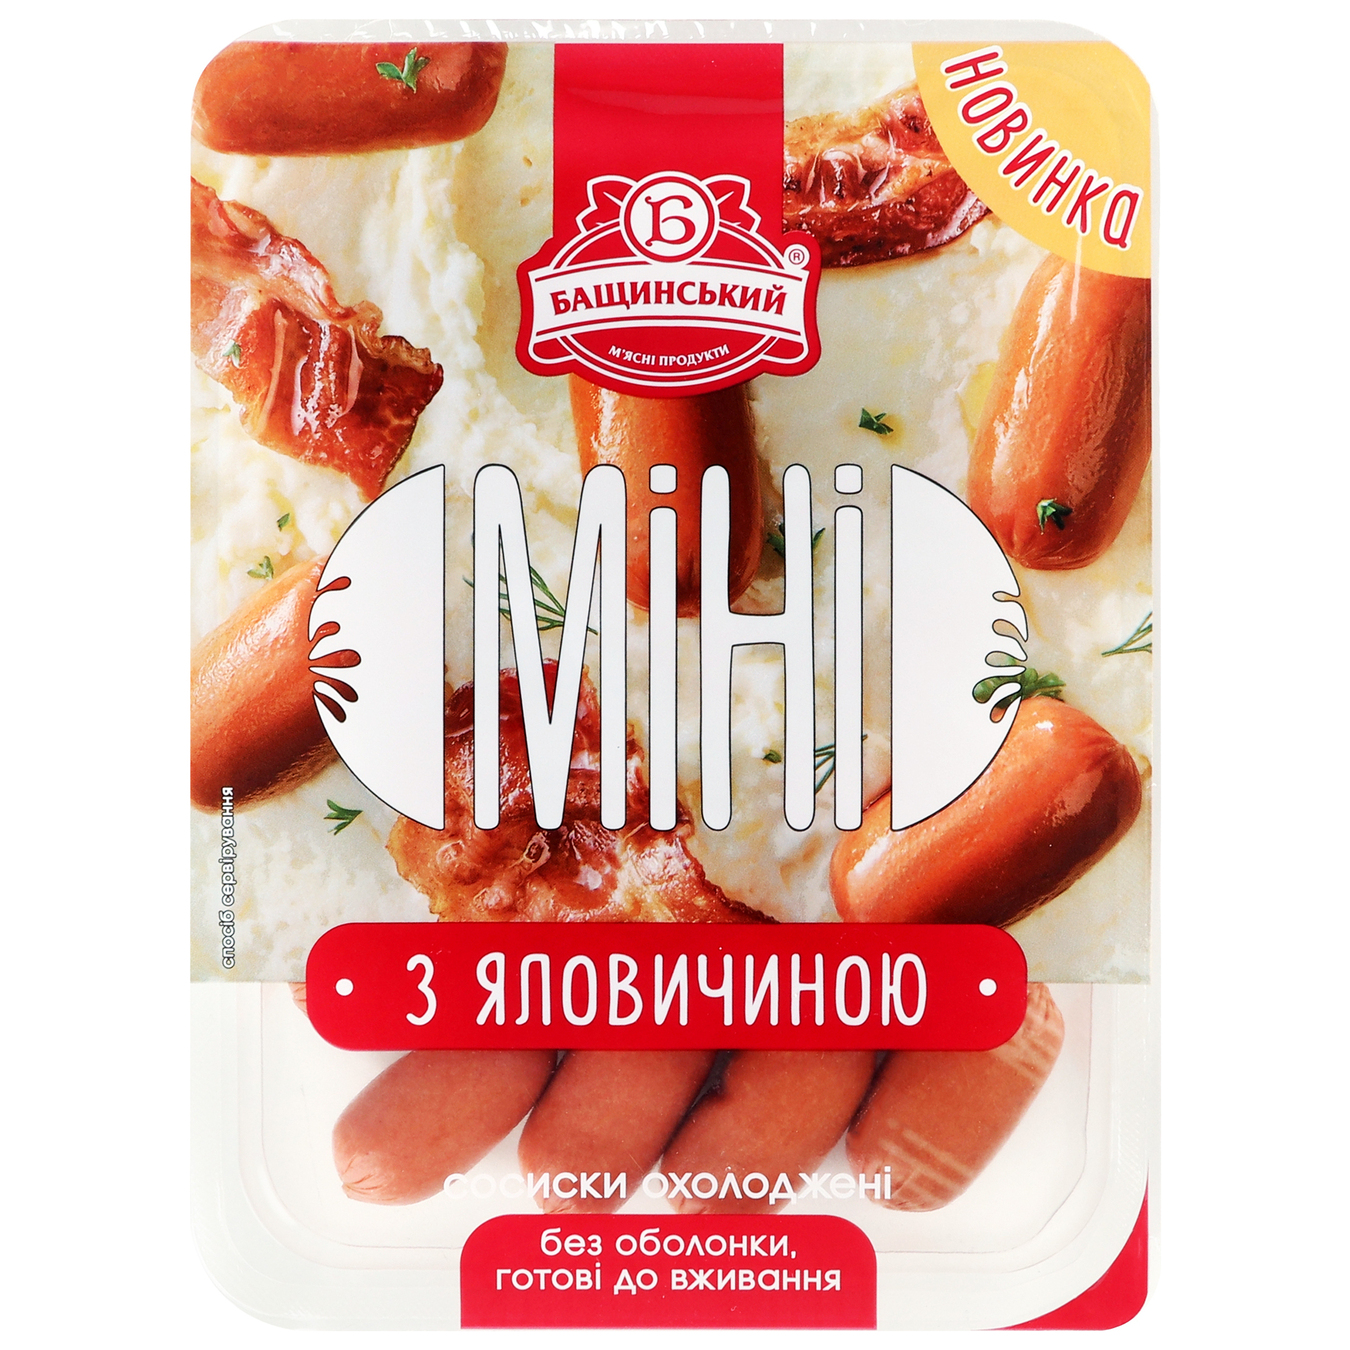 Bashchynsky mini sausages with boiled beef of the highest grade 300g